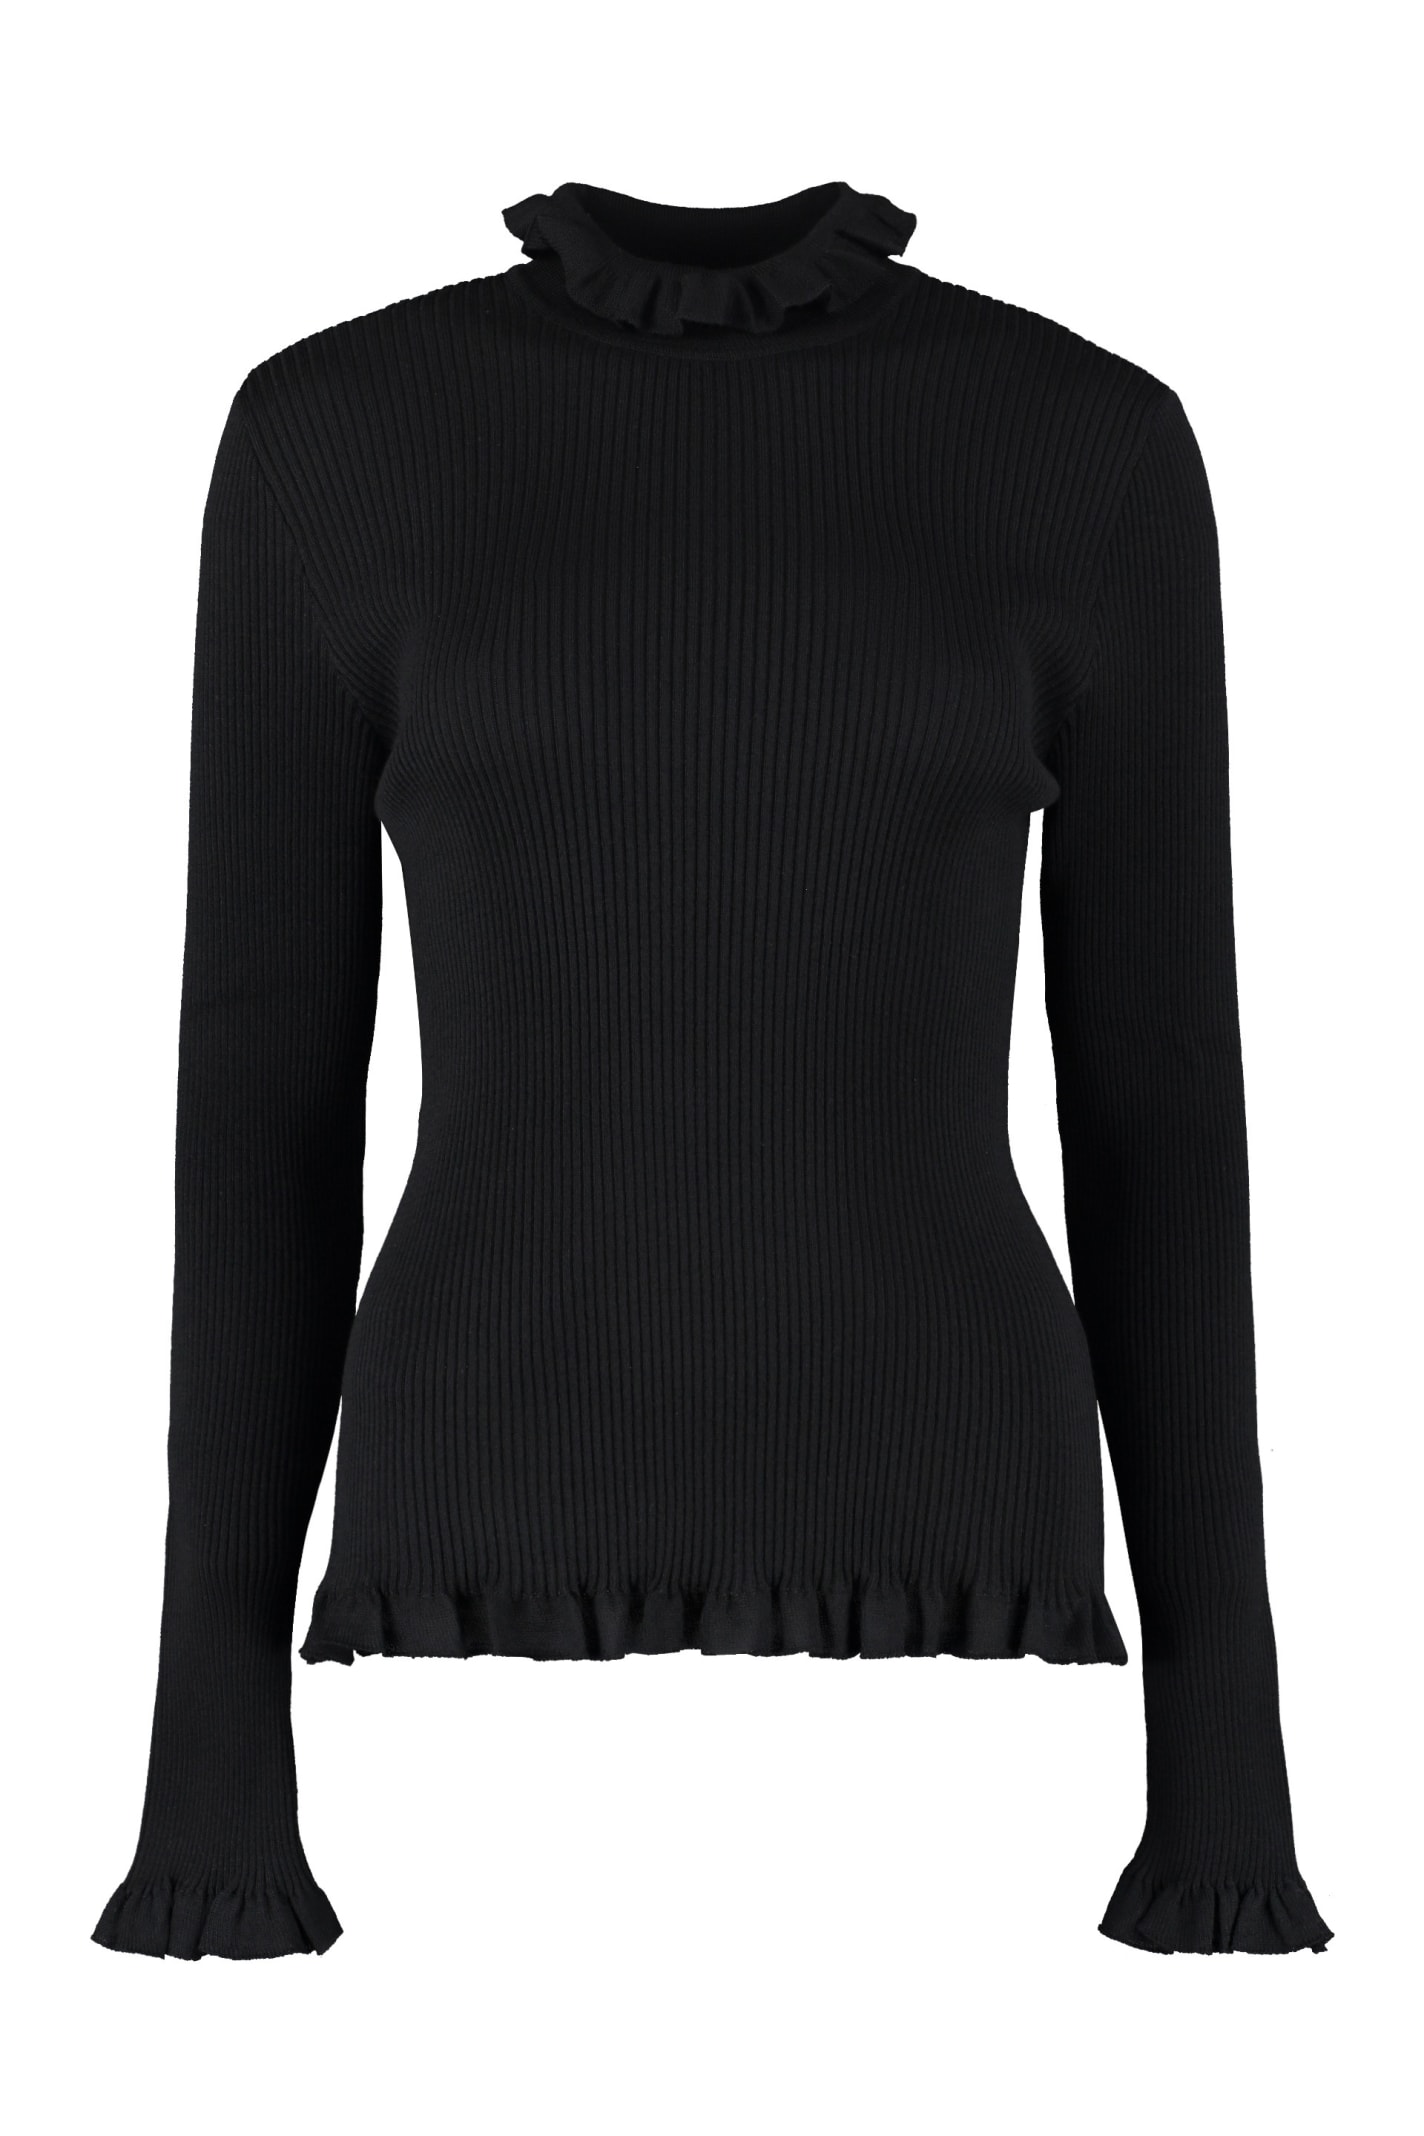 Boutique Moschino Ribbed Turtleneck Sweater